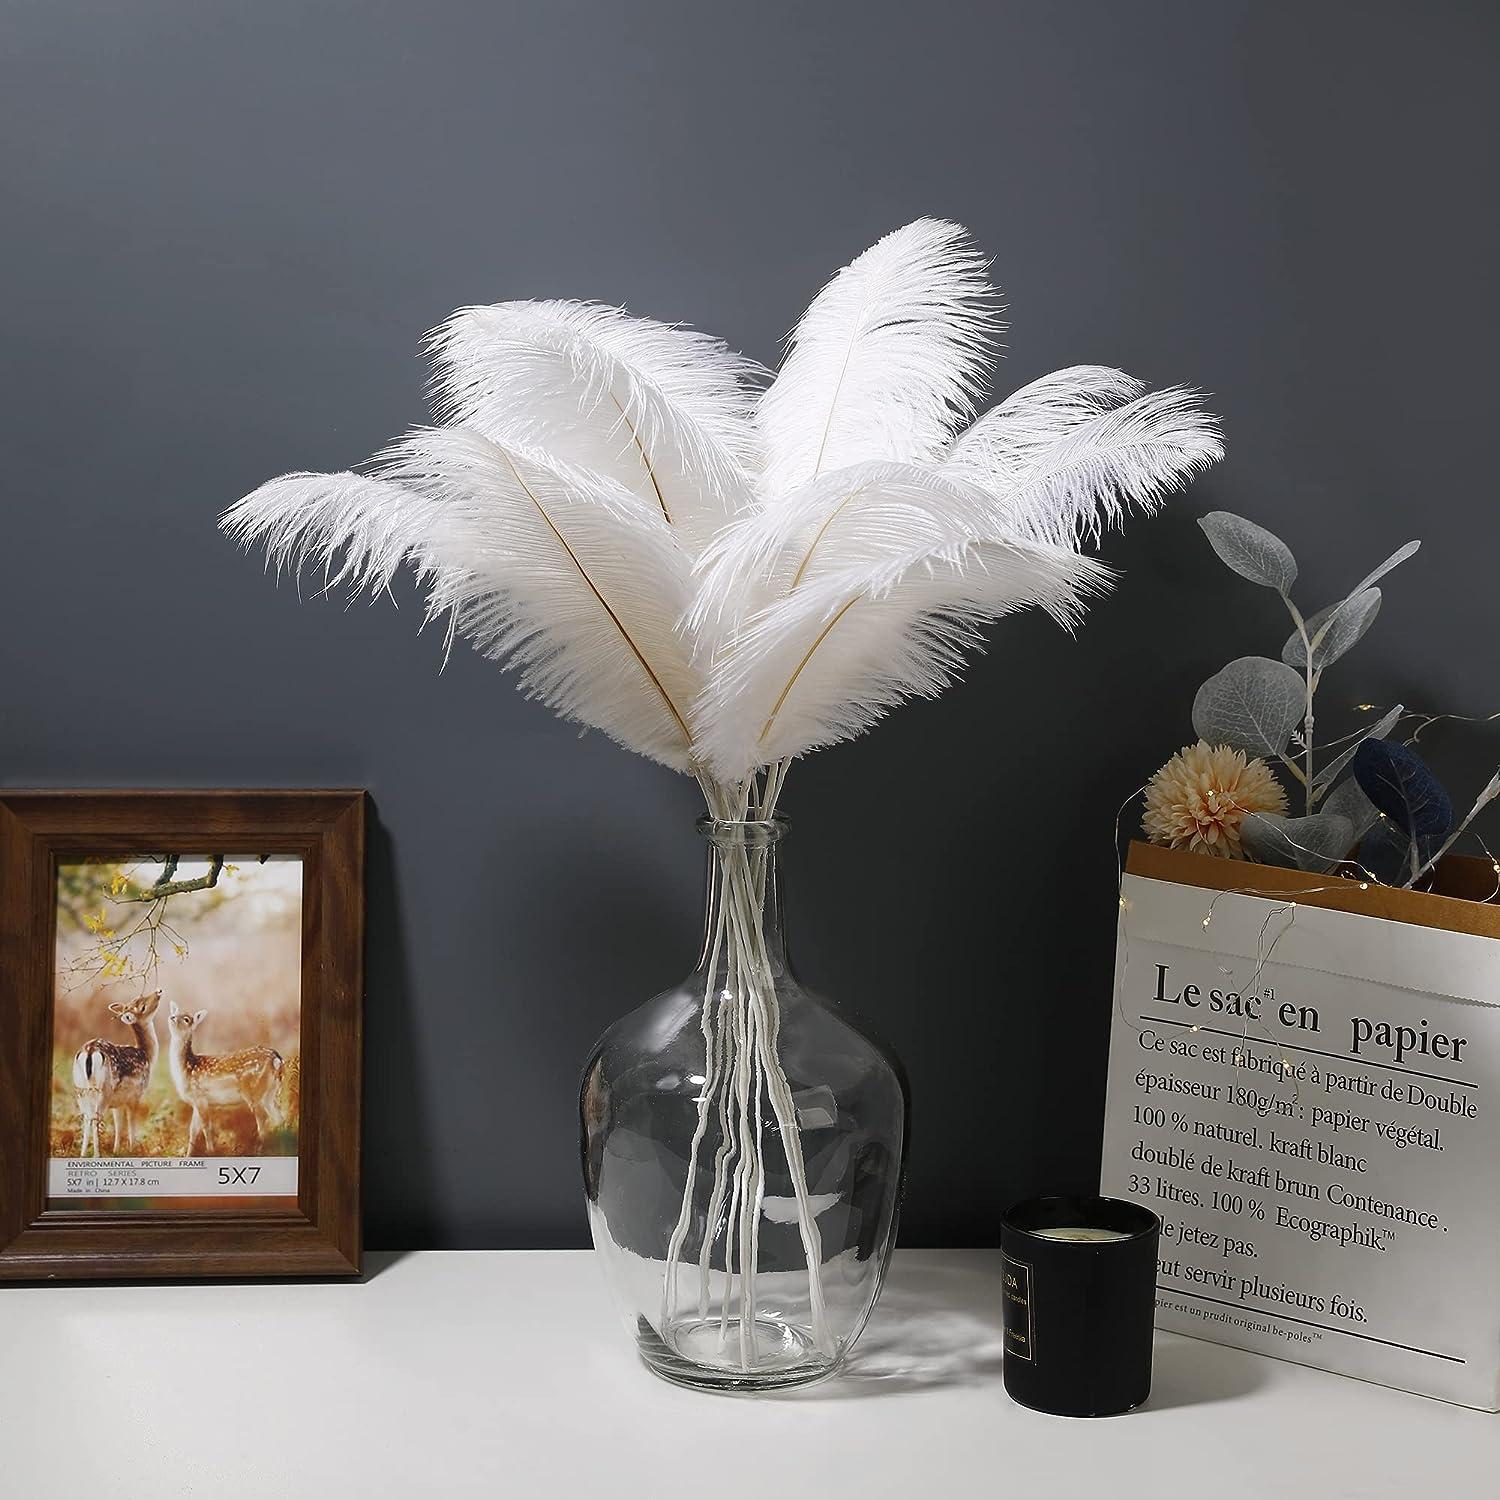 20pcs Making Kit 22 Inch Large Ostrich Feathers for Vase Floral